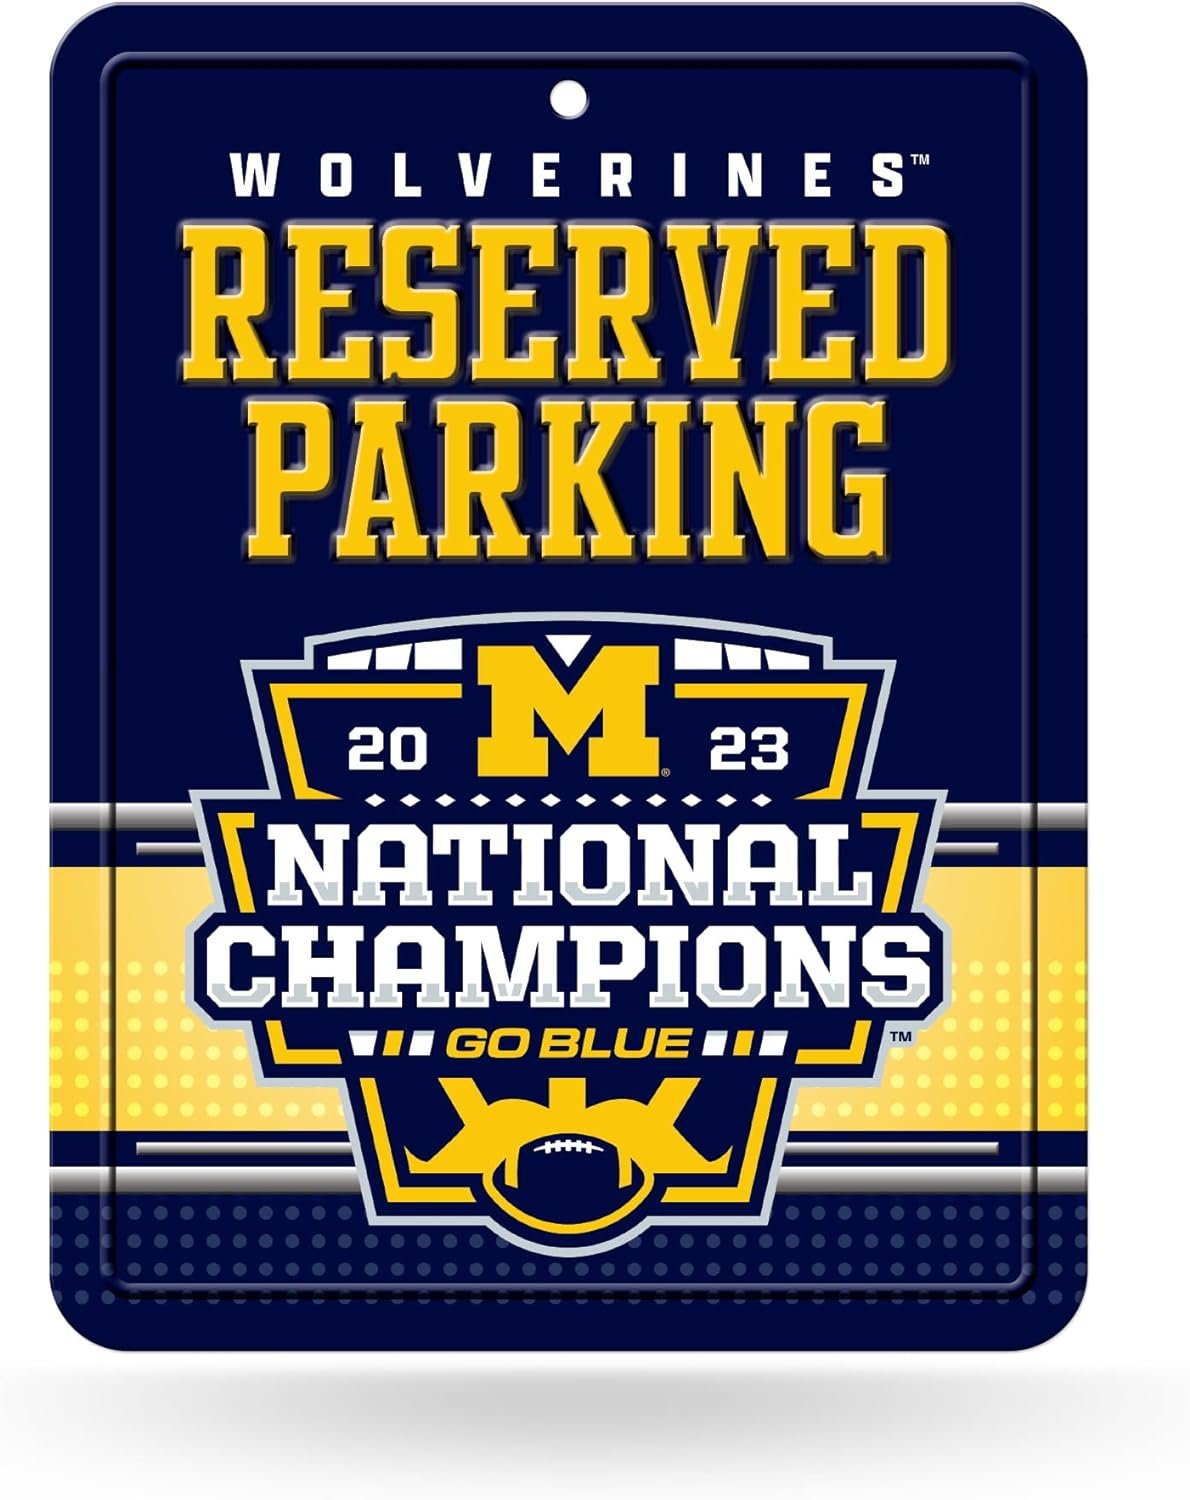 University of Michigan Wolverines 2024 Champions Metal Wall Parking Sign, 8.5x11 Inch, Great for Man Cave, Bed Room, Office, Home Decor